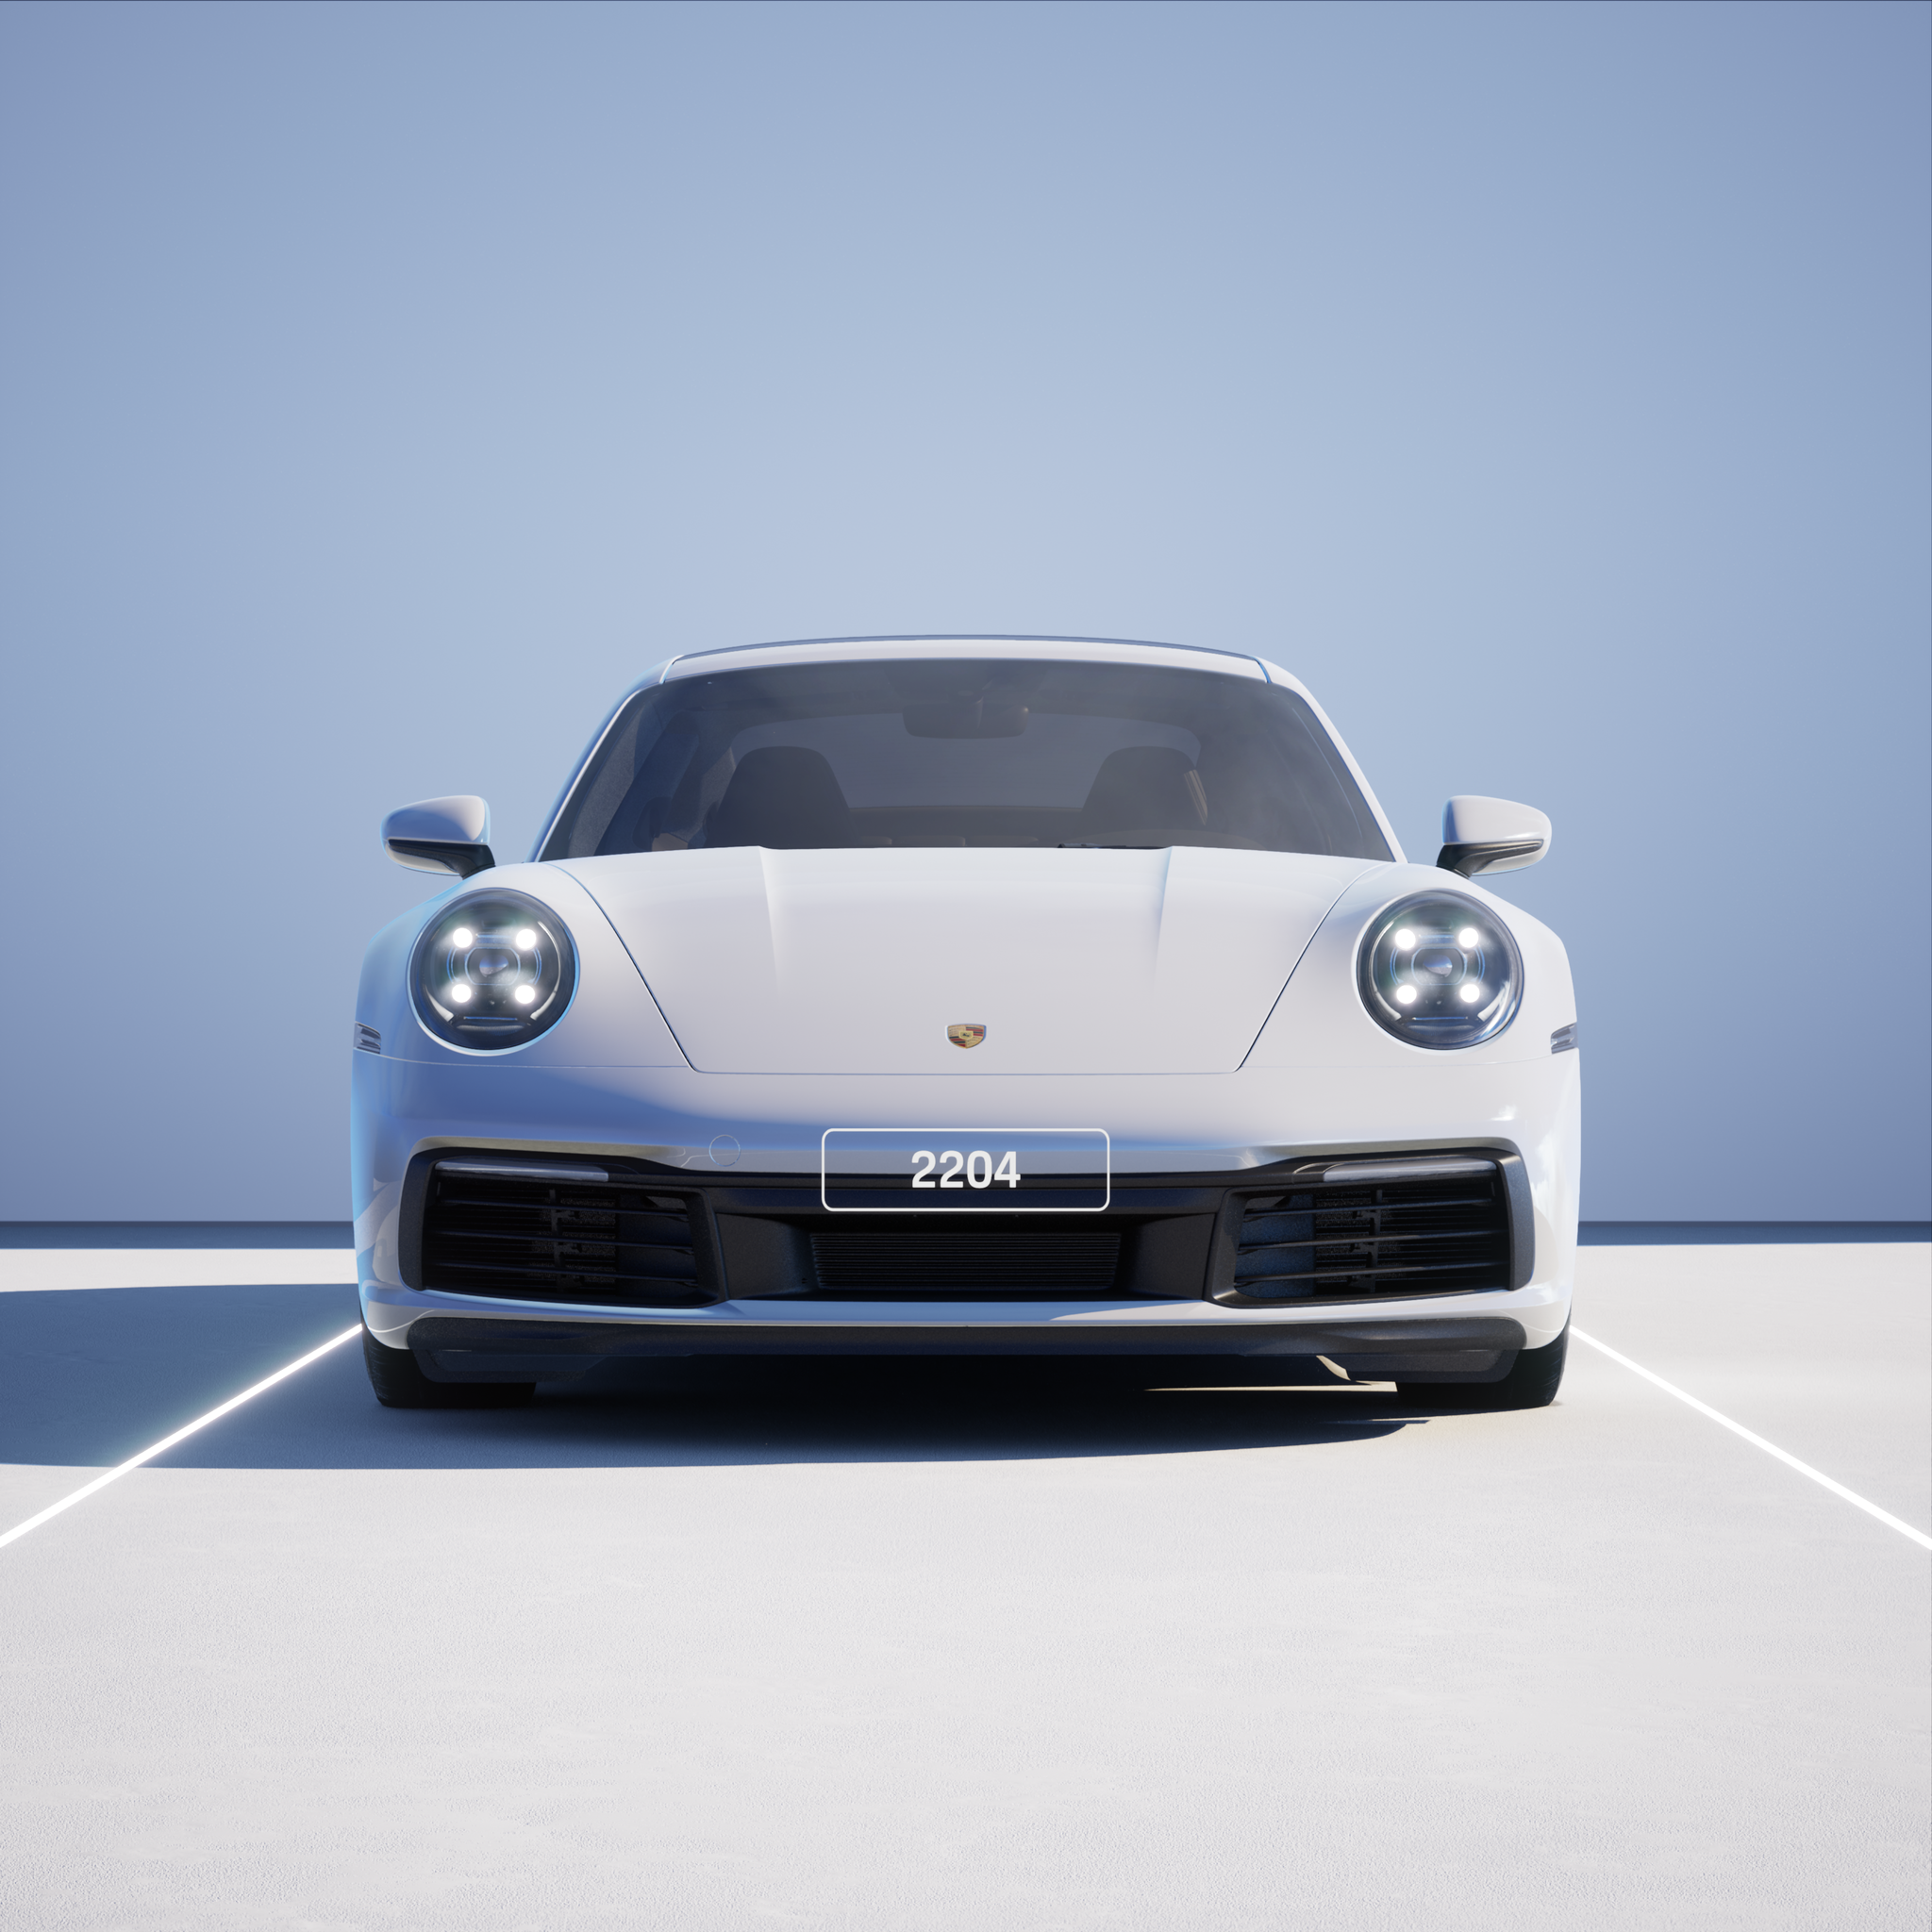 The PORSCHΞ 911 2204 image in phase